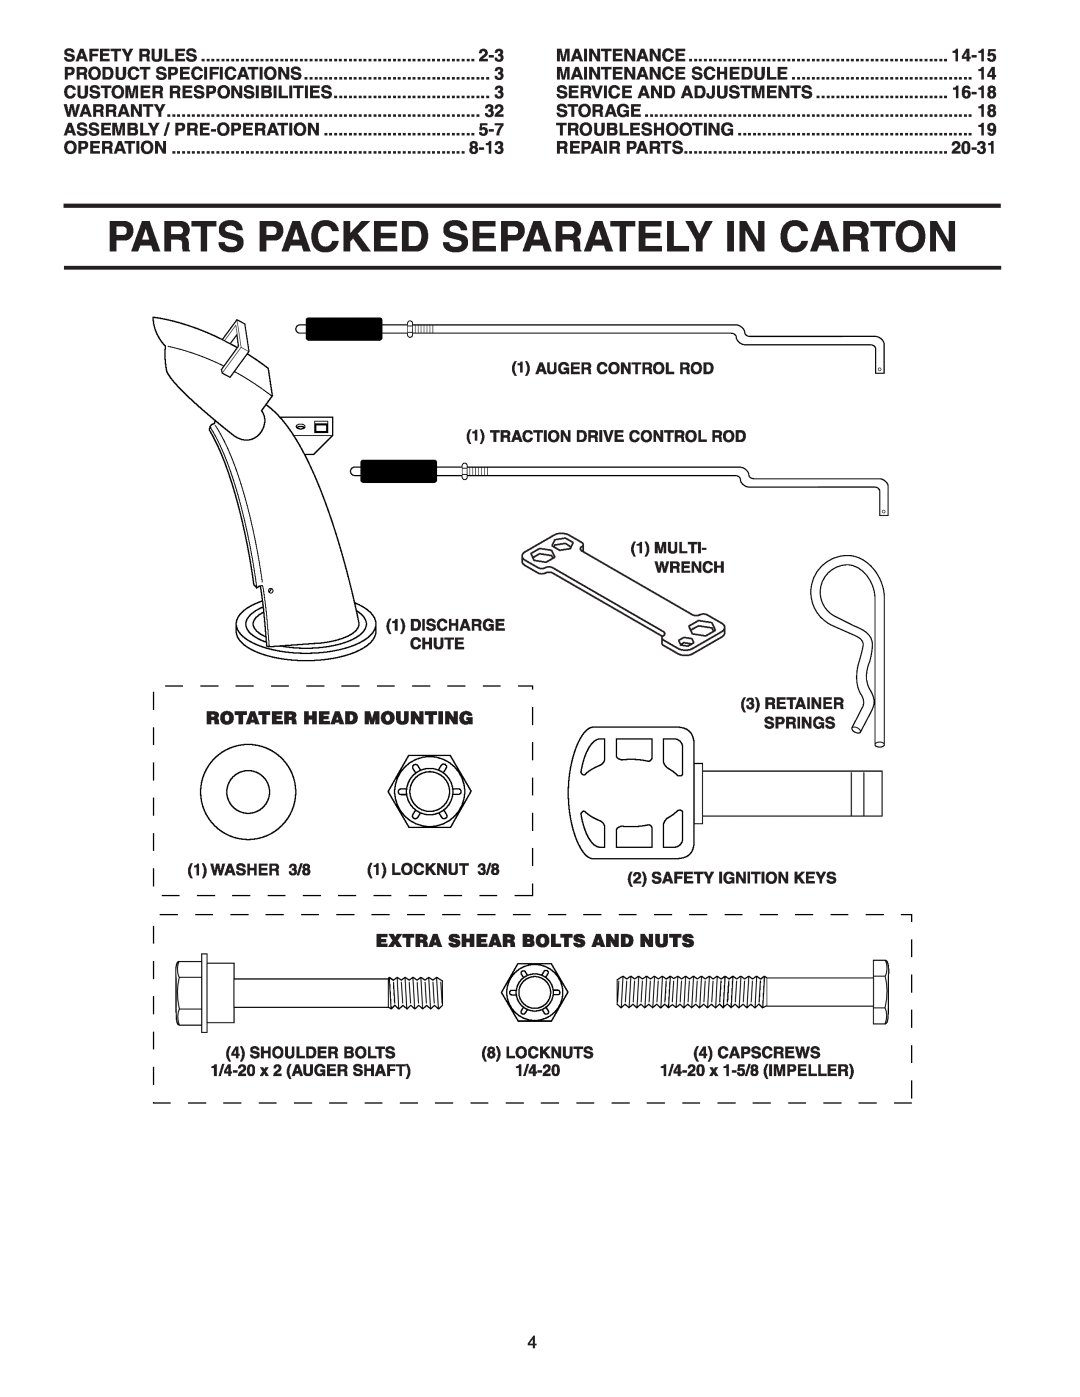 Poulan PP524A owner manual Parts Packed Separately In Carton, 8-13, 14-15, Service And Adjustments, 16-18, 20-31 